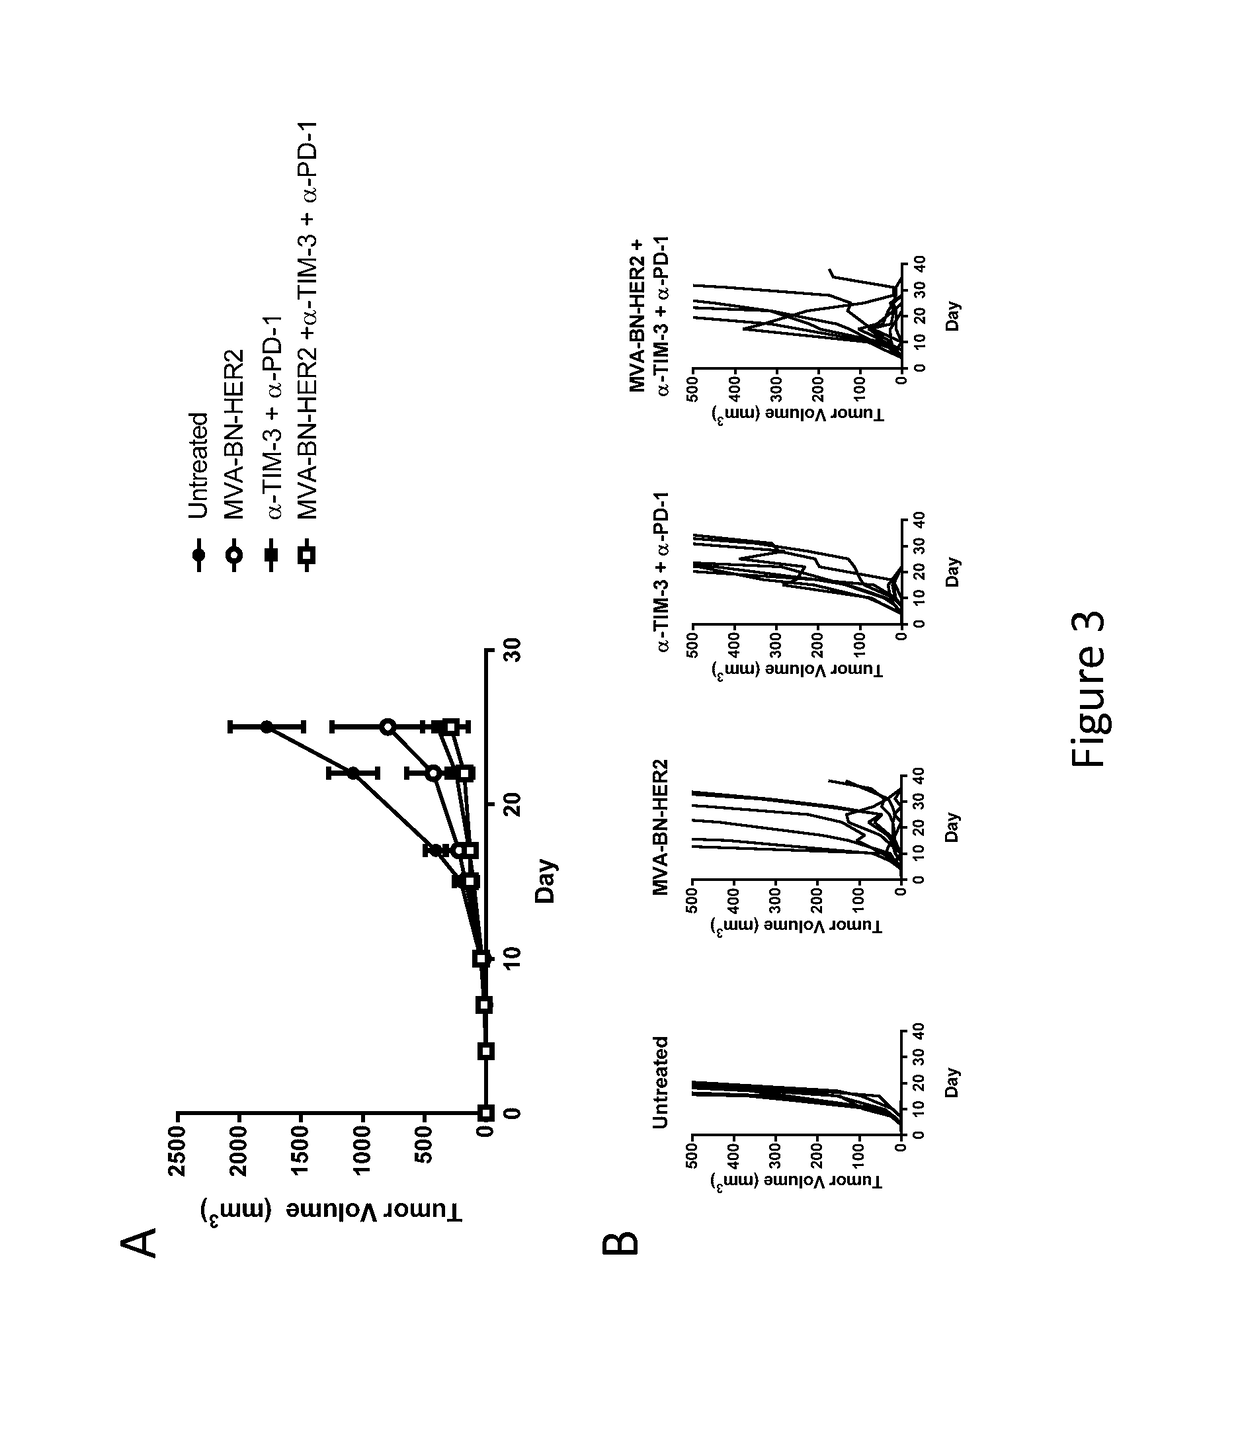 Combination Therapy for Treating Cancer with a Poxvirus Expressing a Tumor Antigen and an Antagonist of TIM-3